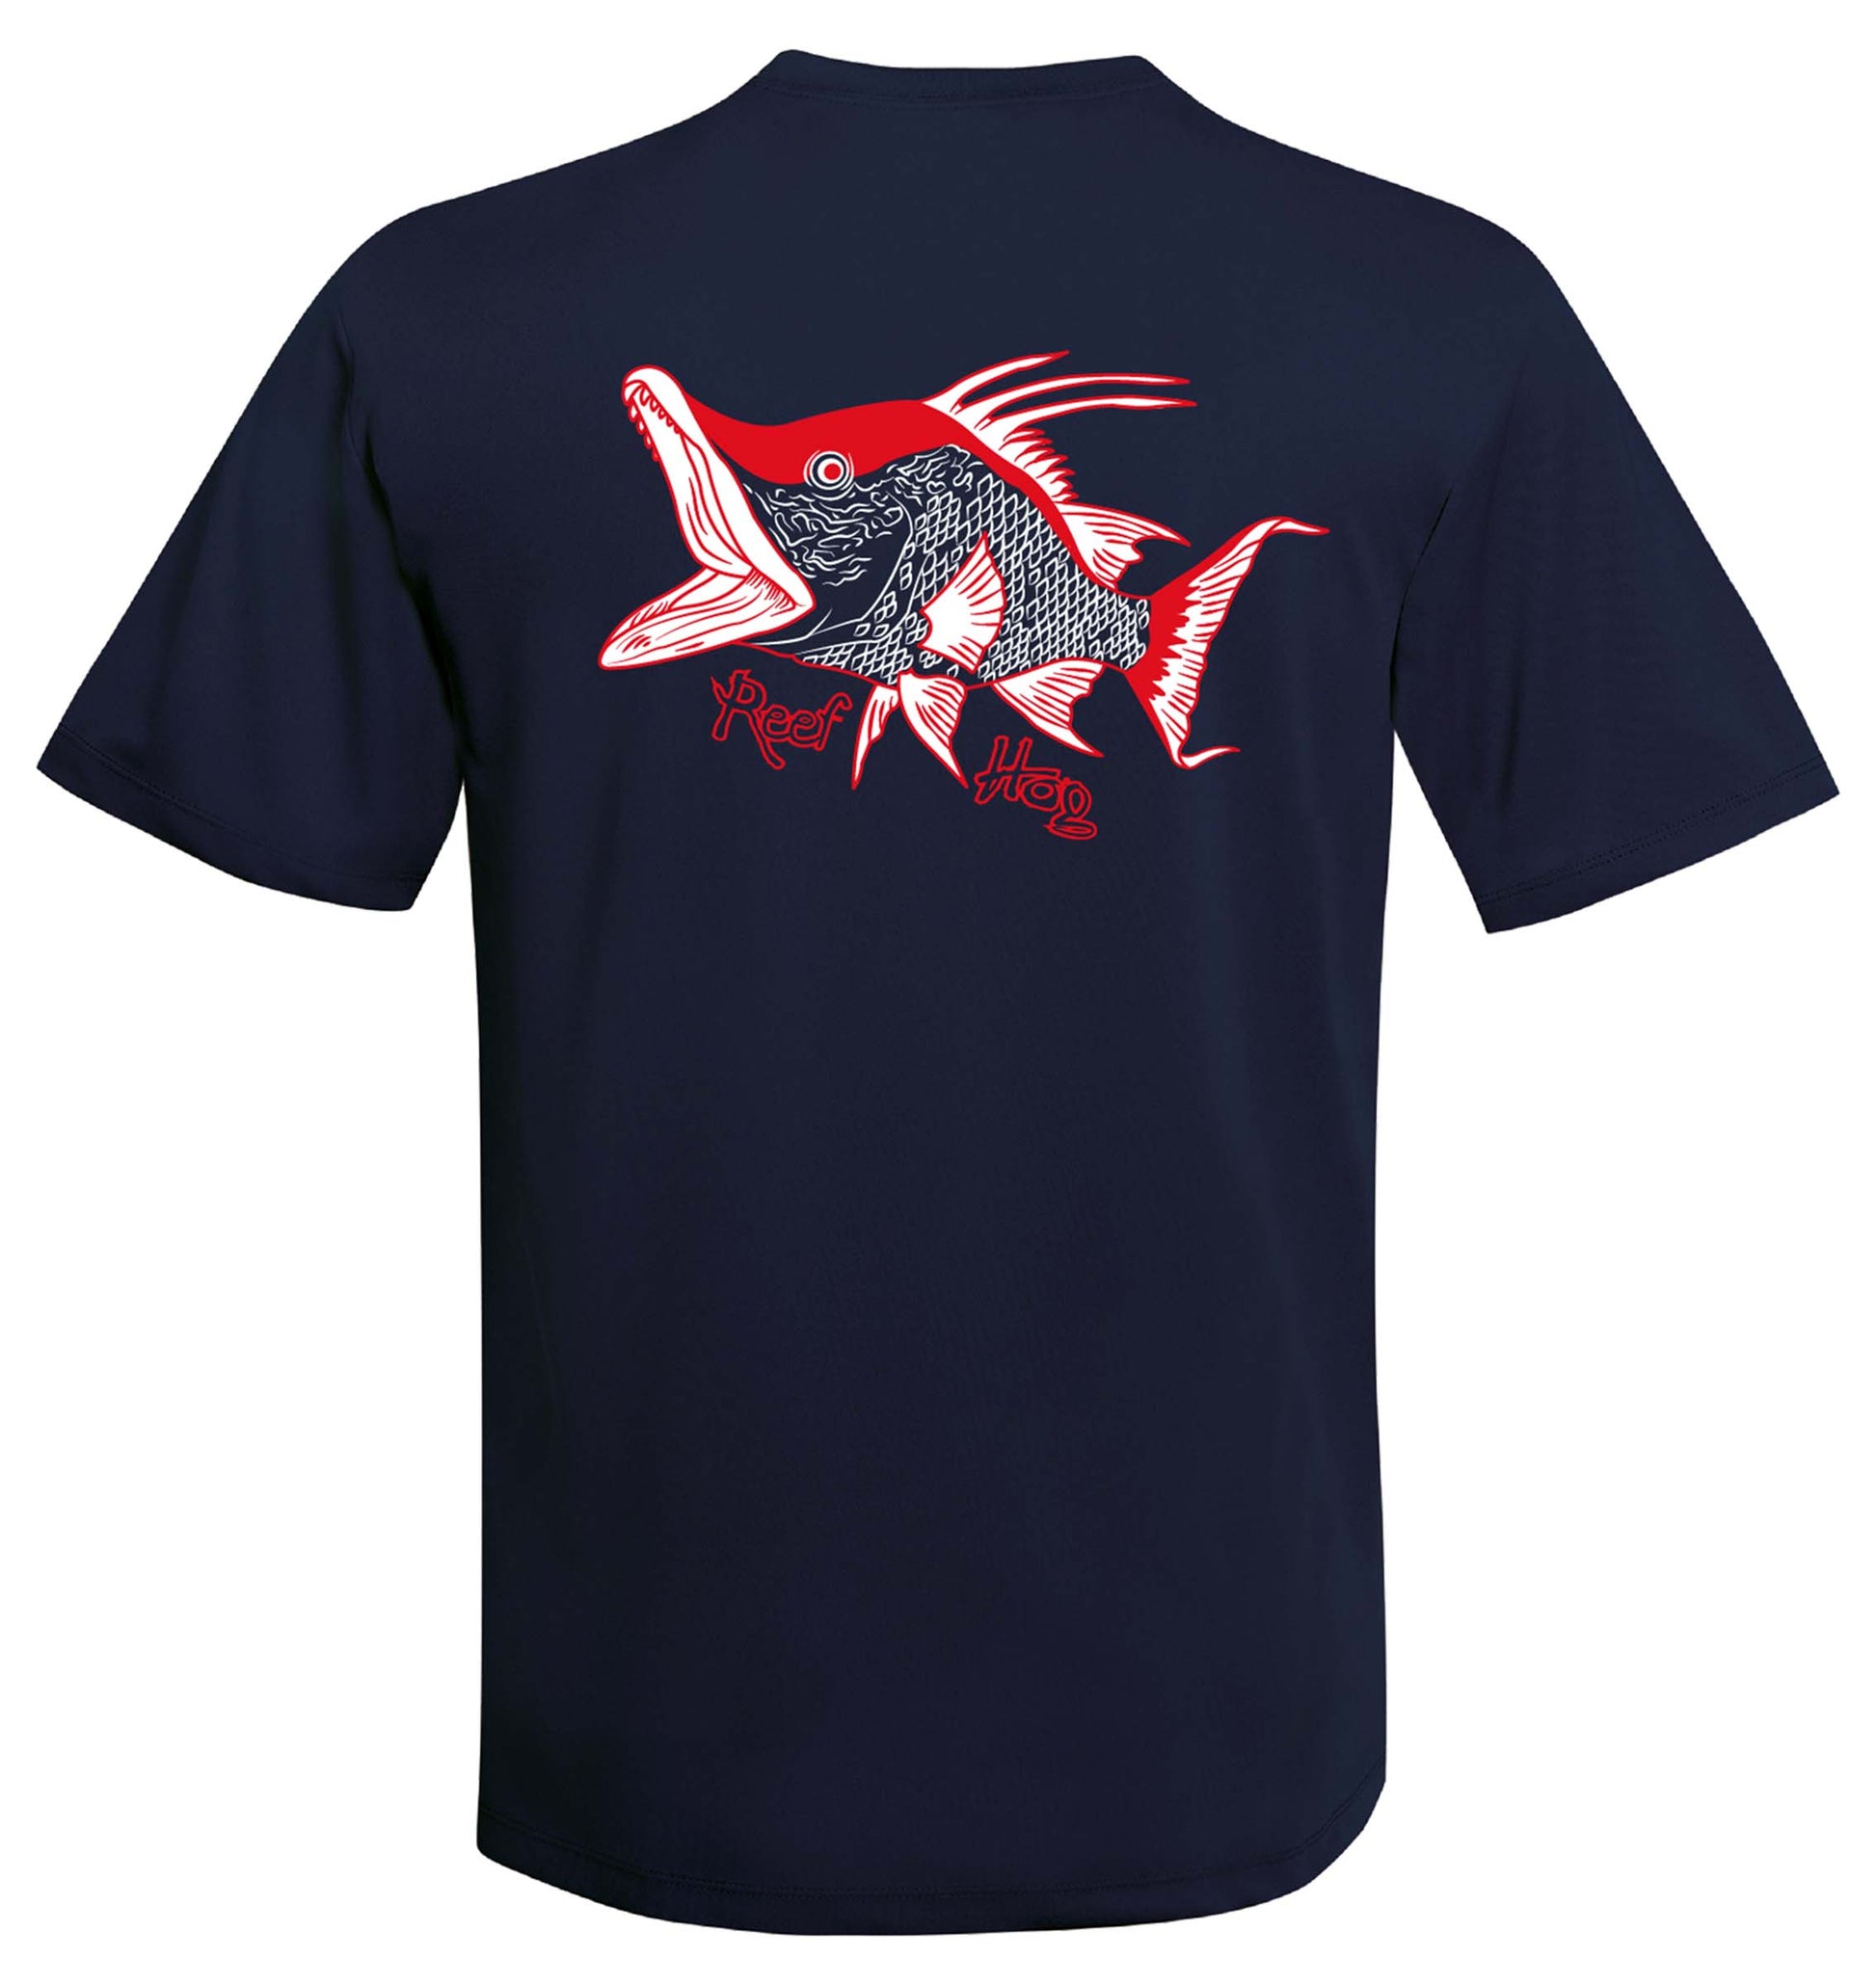 Hogfish on Chest Long Sleeve UPF 50+ Dry-Fit Shirt - Russell's Western  Wear, Inc.